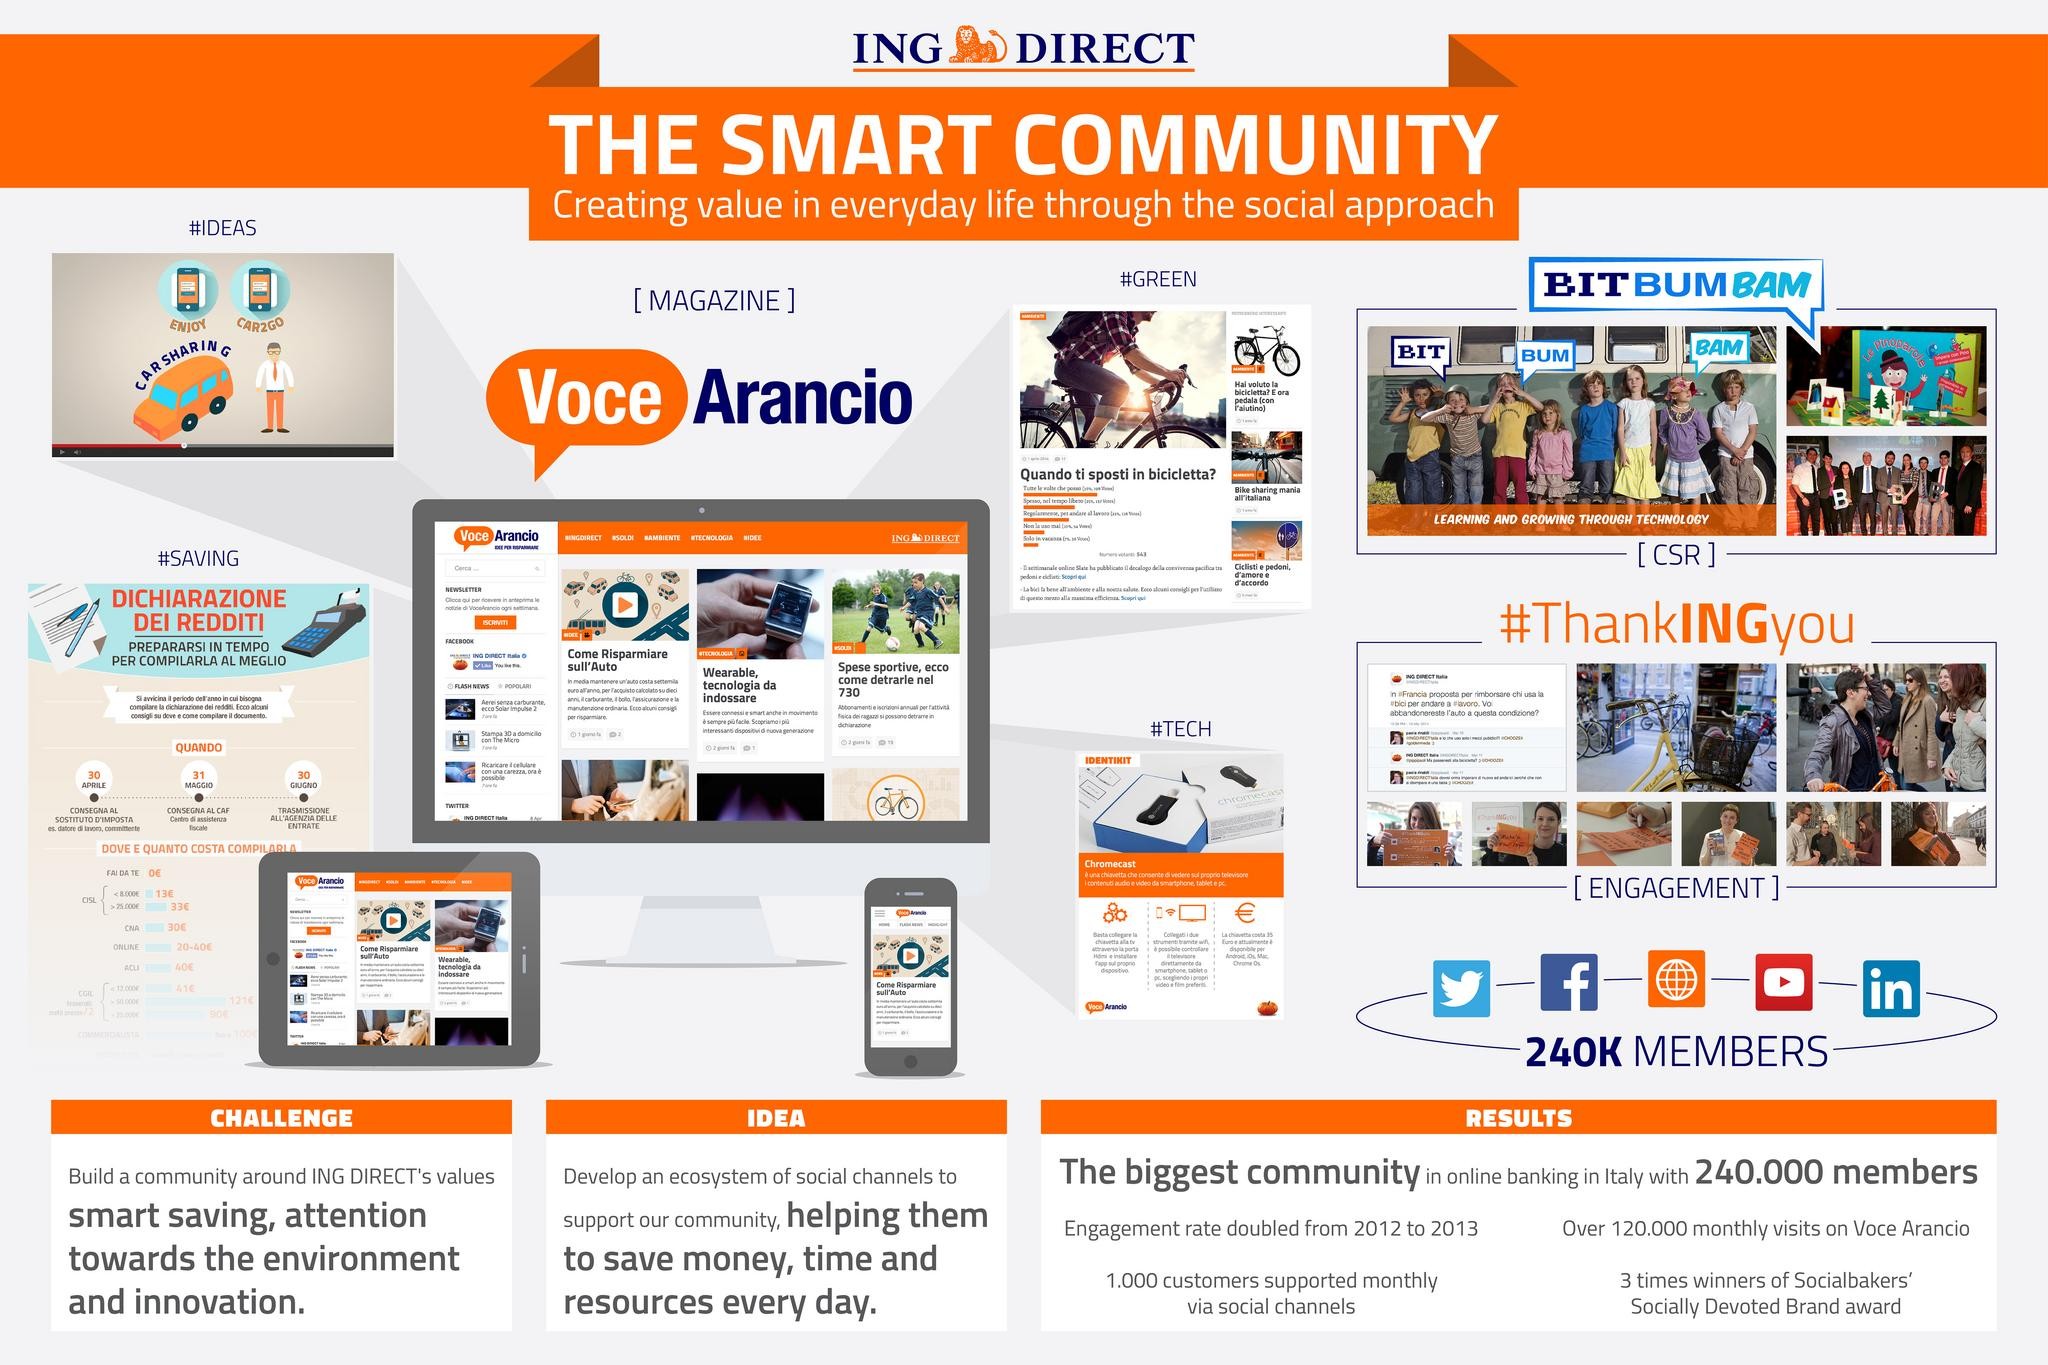 ING DIRECT: THE SMART COMMUNITY